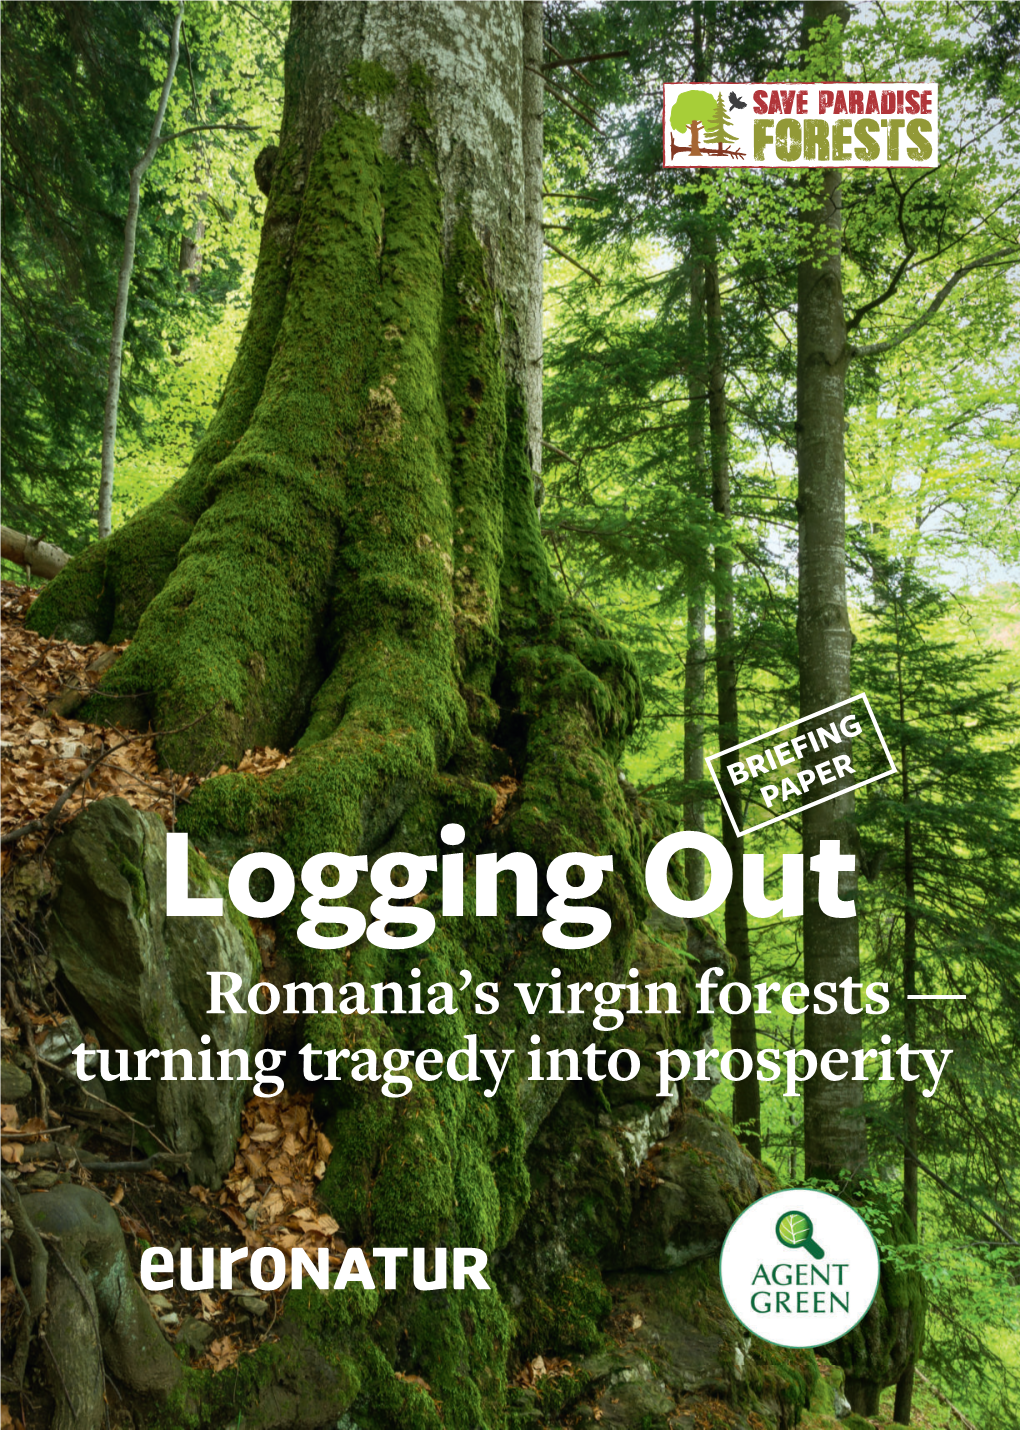 Romania's Virgin Forests